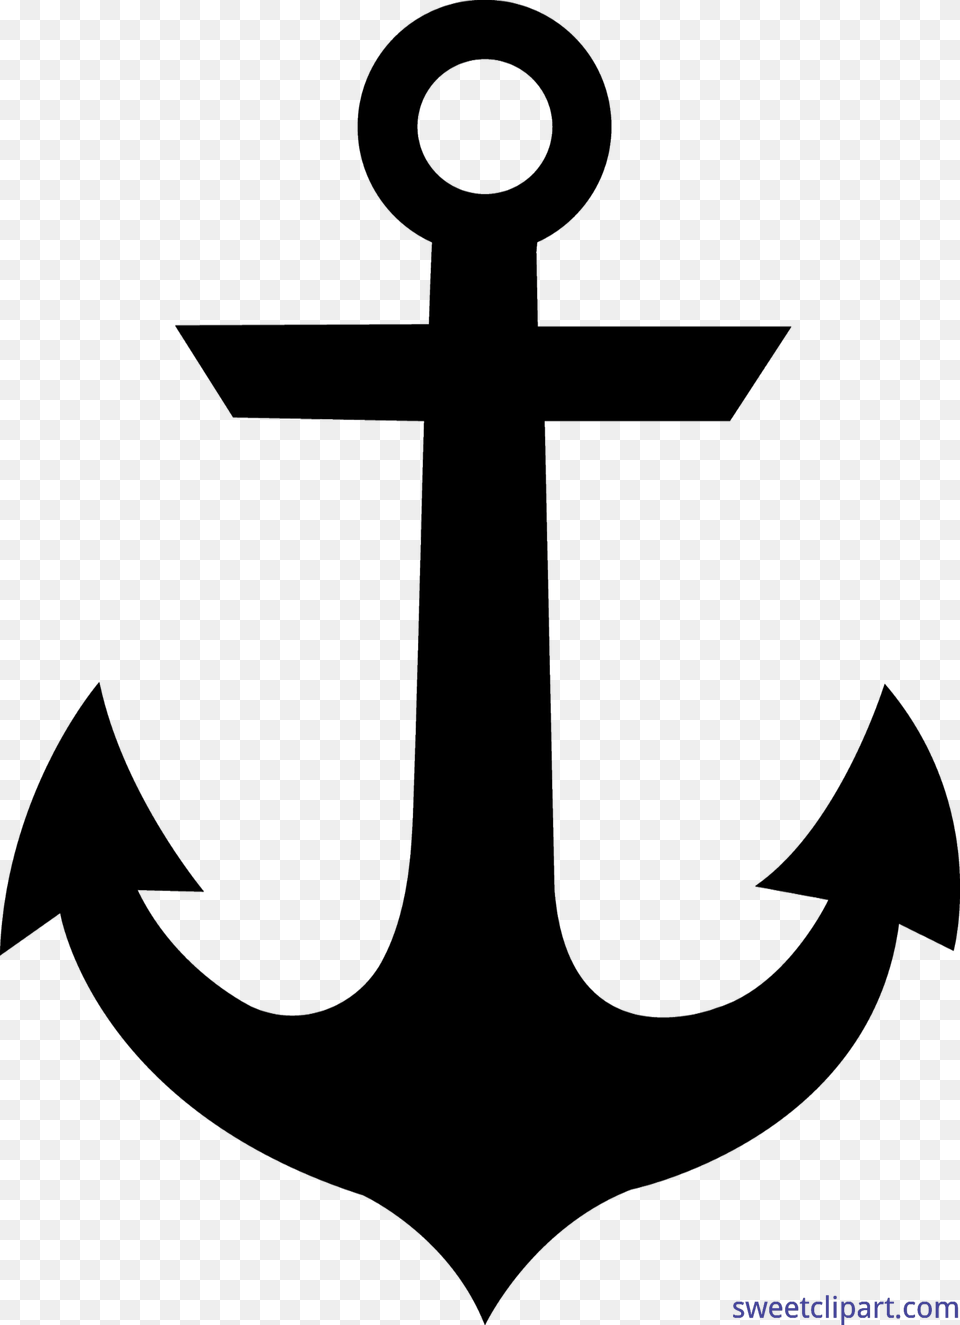 Anchor Silhouette Clip Art Png Image